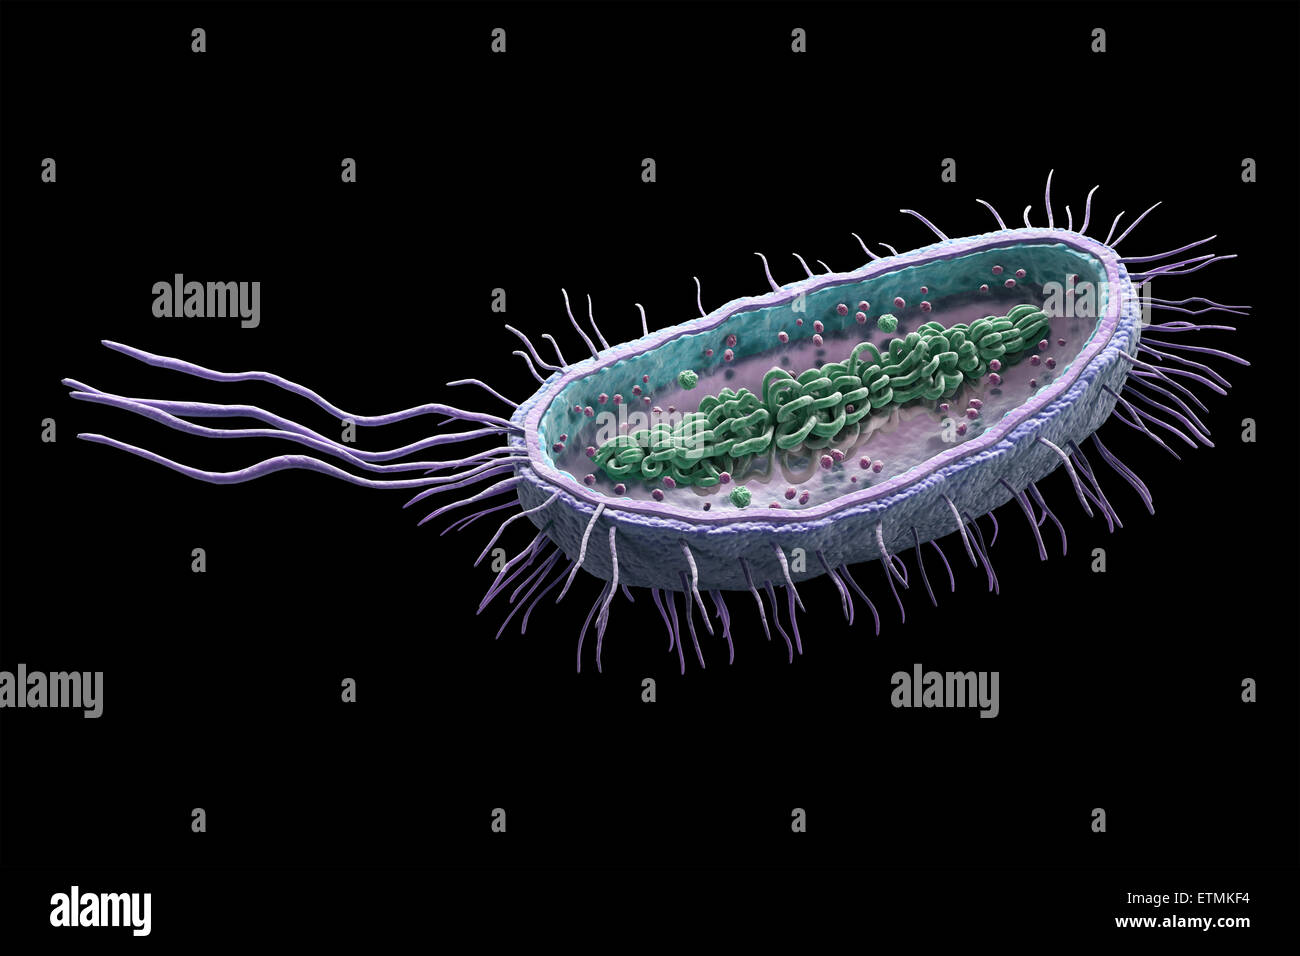 Cross section illustration of a bacteria, showing the inner structure. Stock Photo